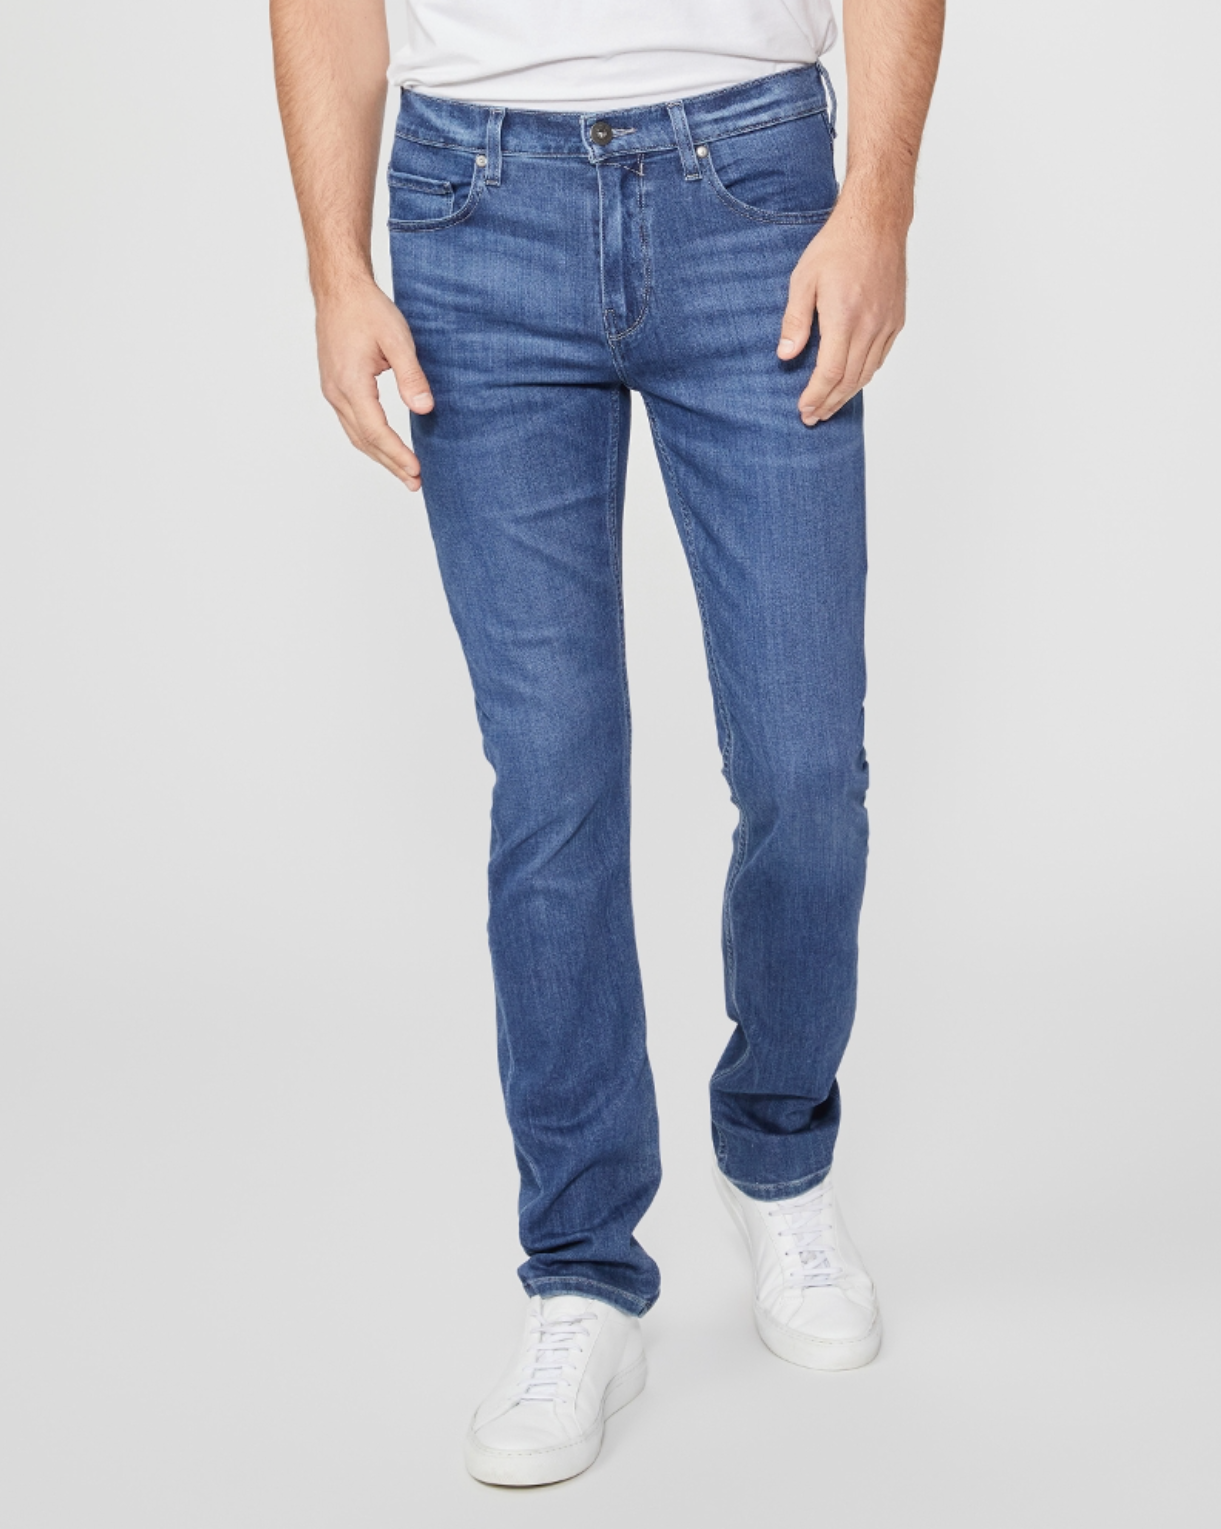 waist down front view of the federal slim straight jean from paige in redding blue